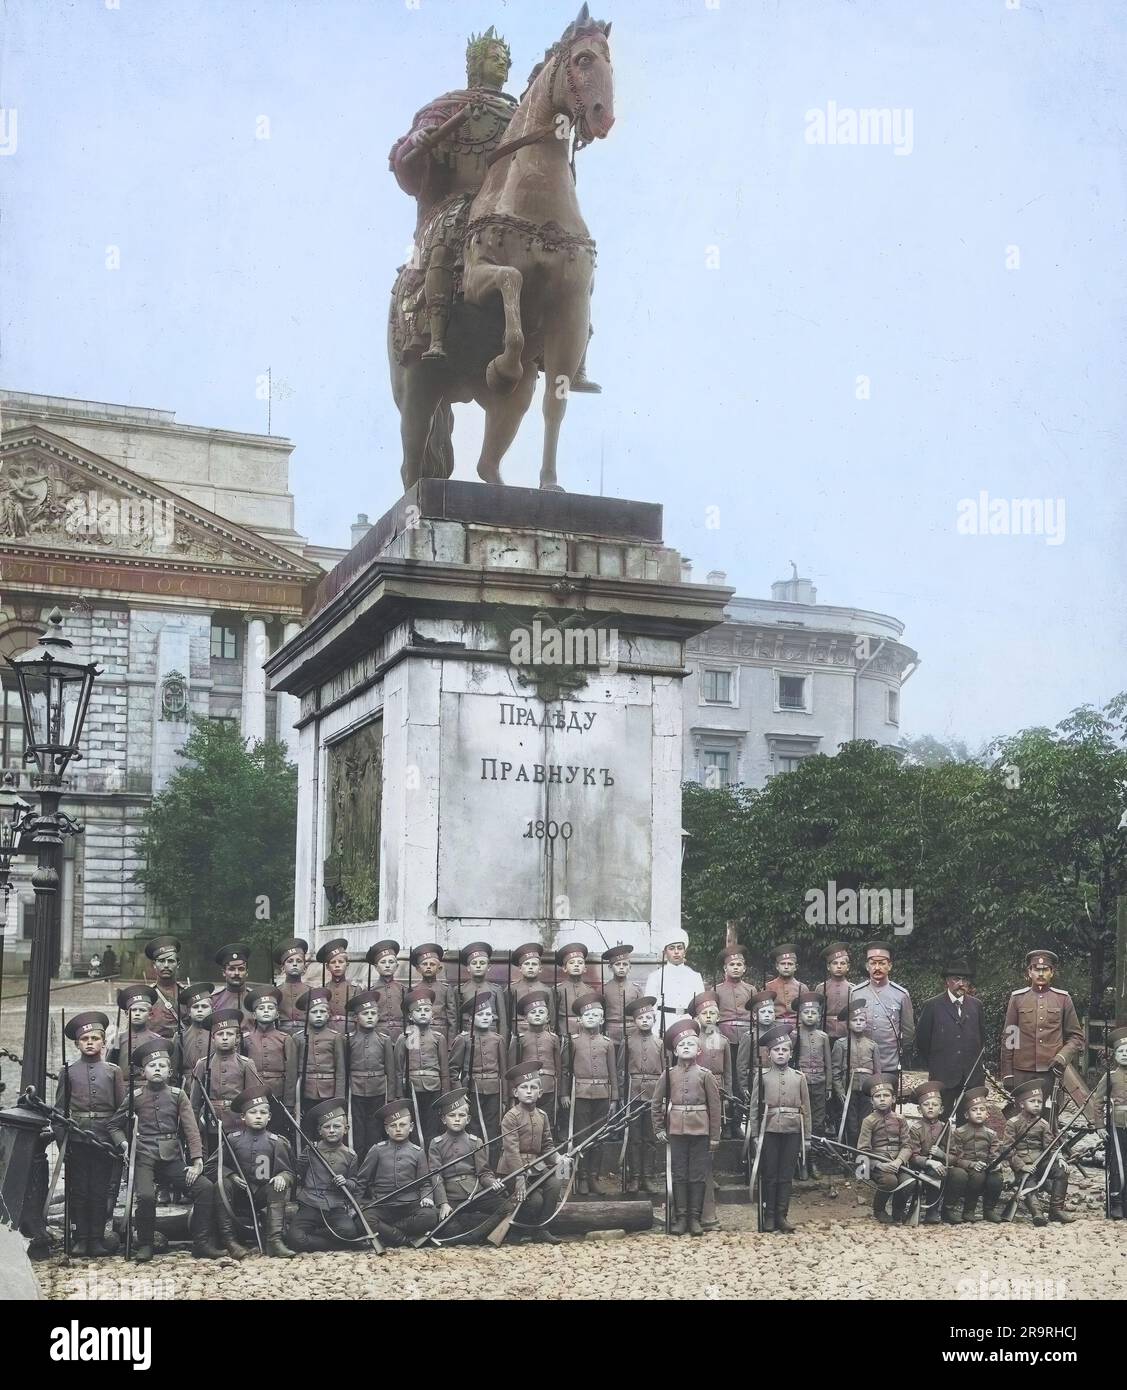 Approximately 1913 in Russia, group of young military cadets posing for a class photo beneath statue of Peter I in Stock Photo